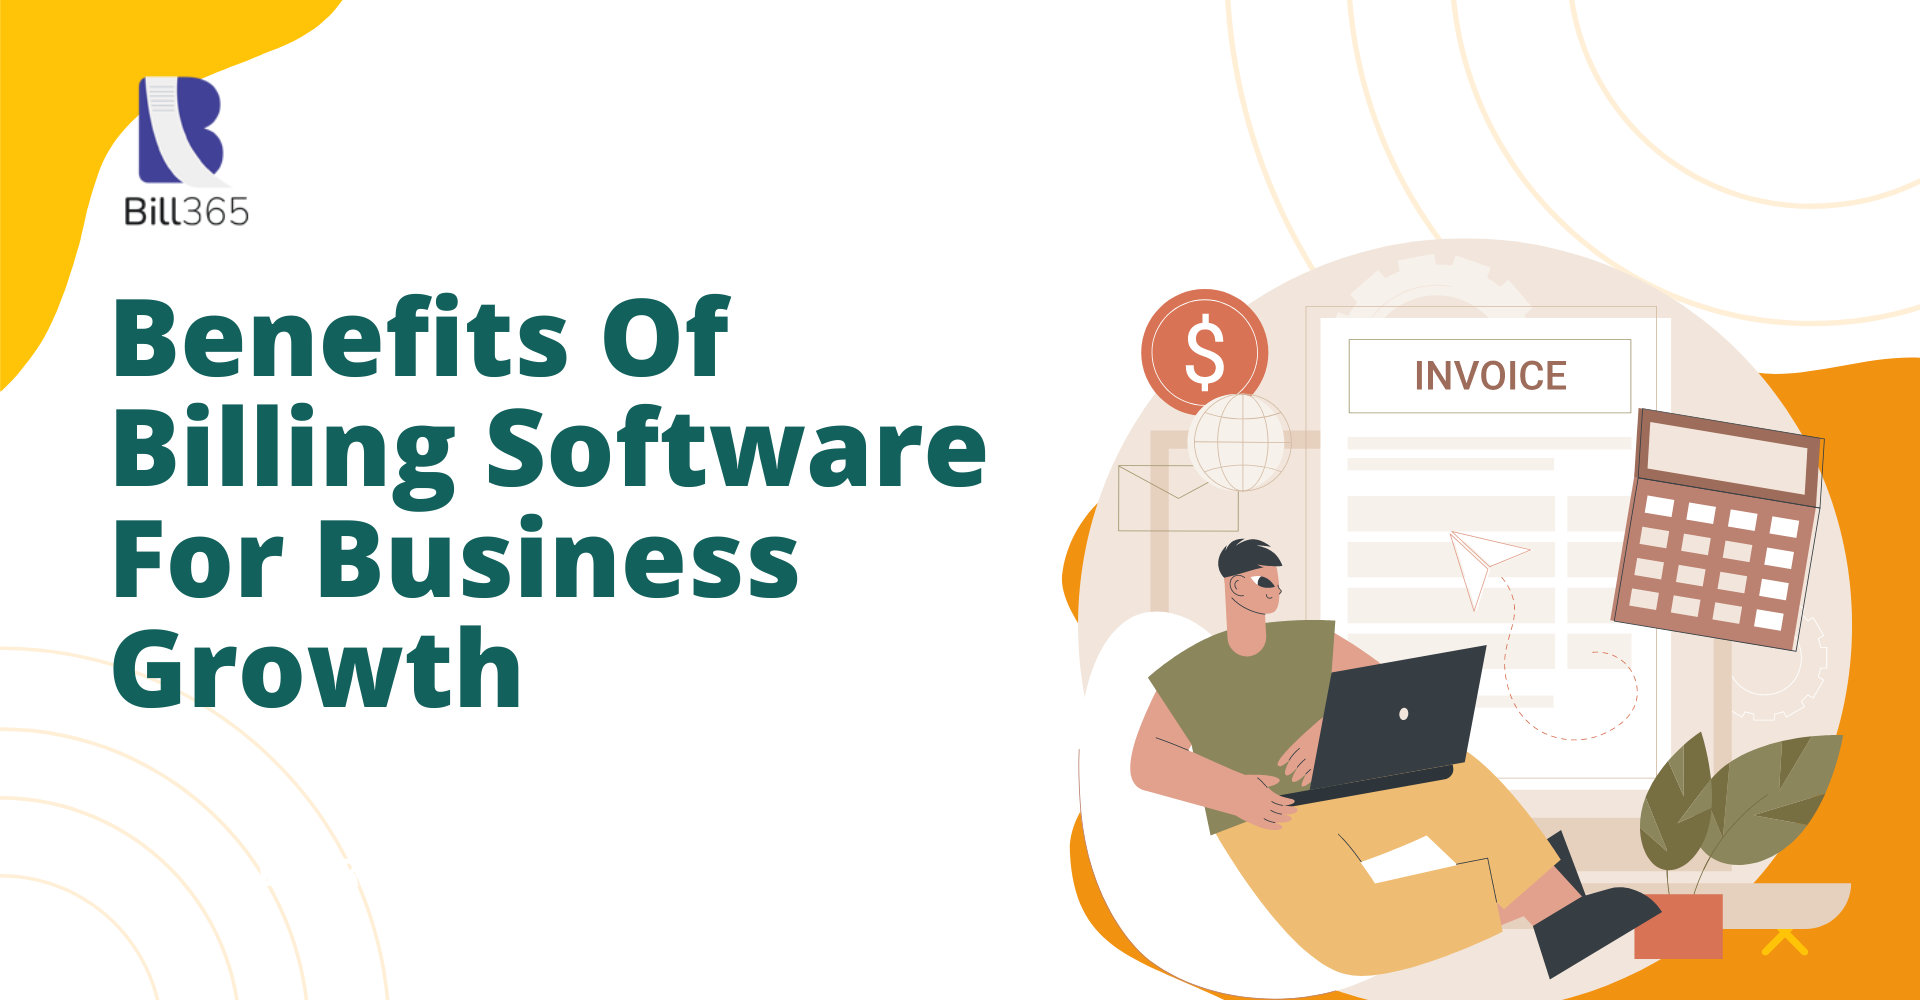 Benefits Of Billing Software For Business Growth